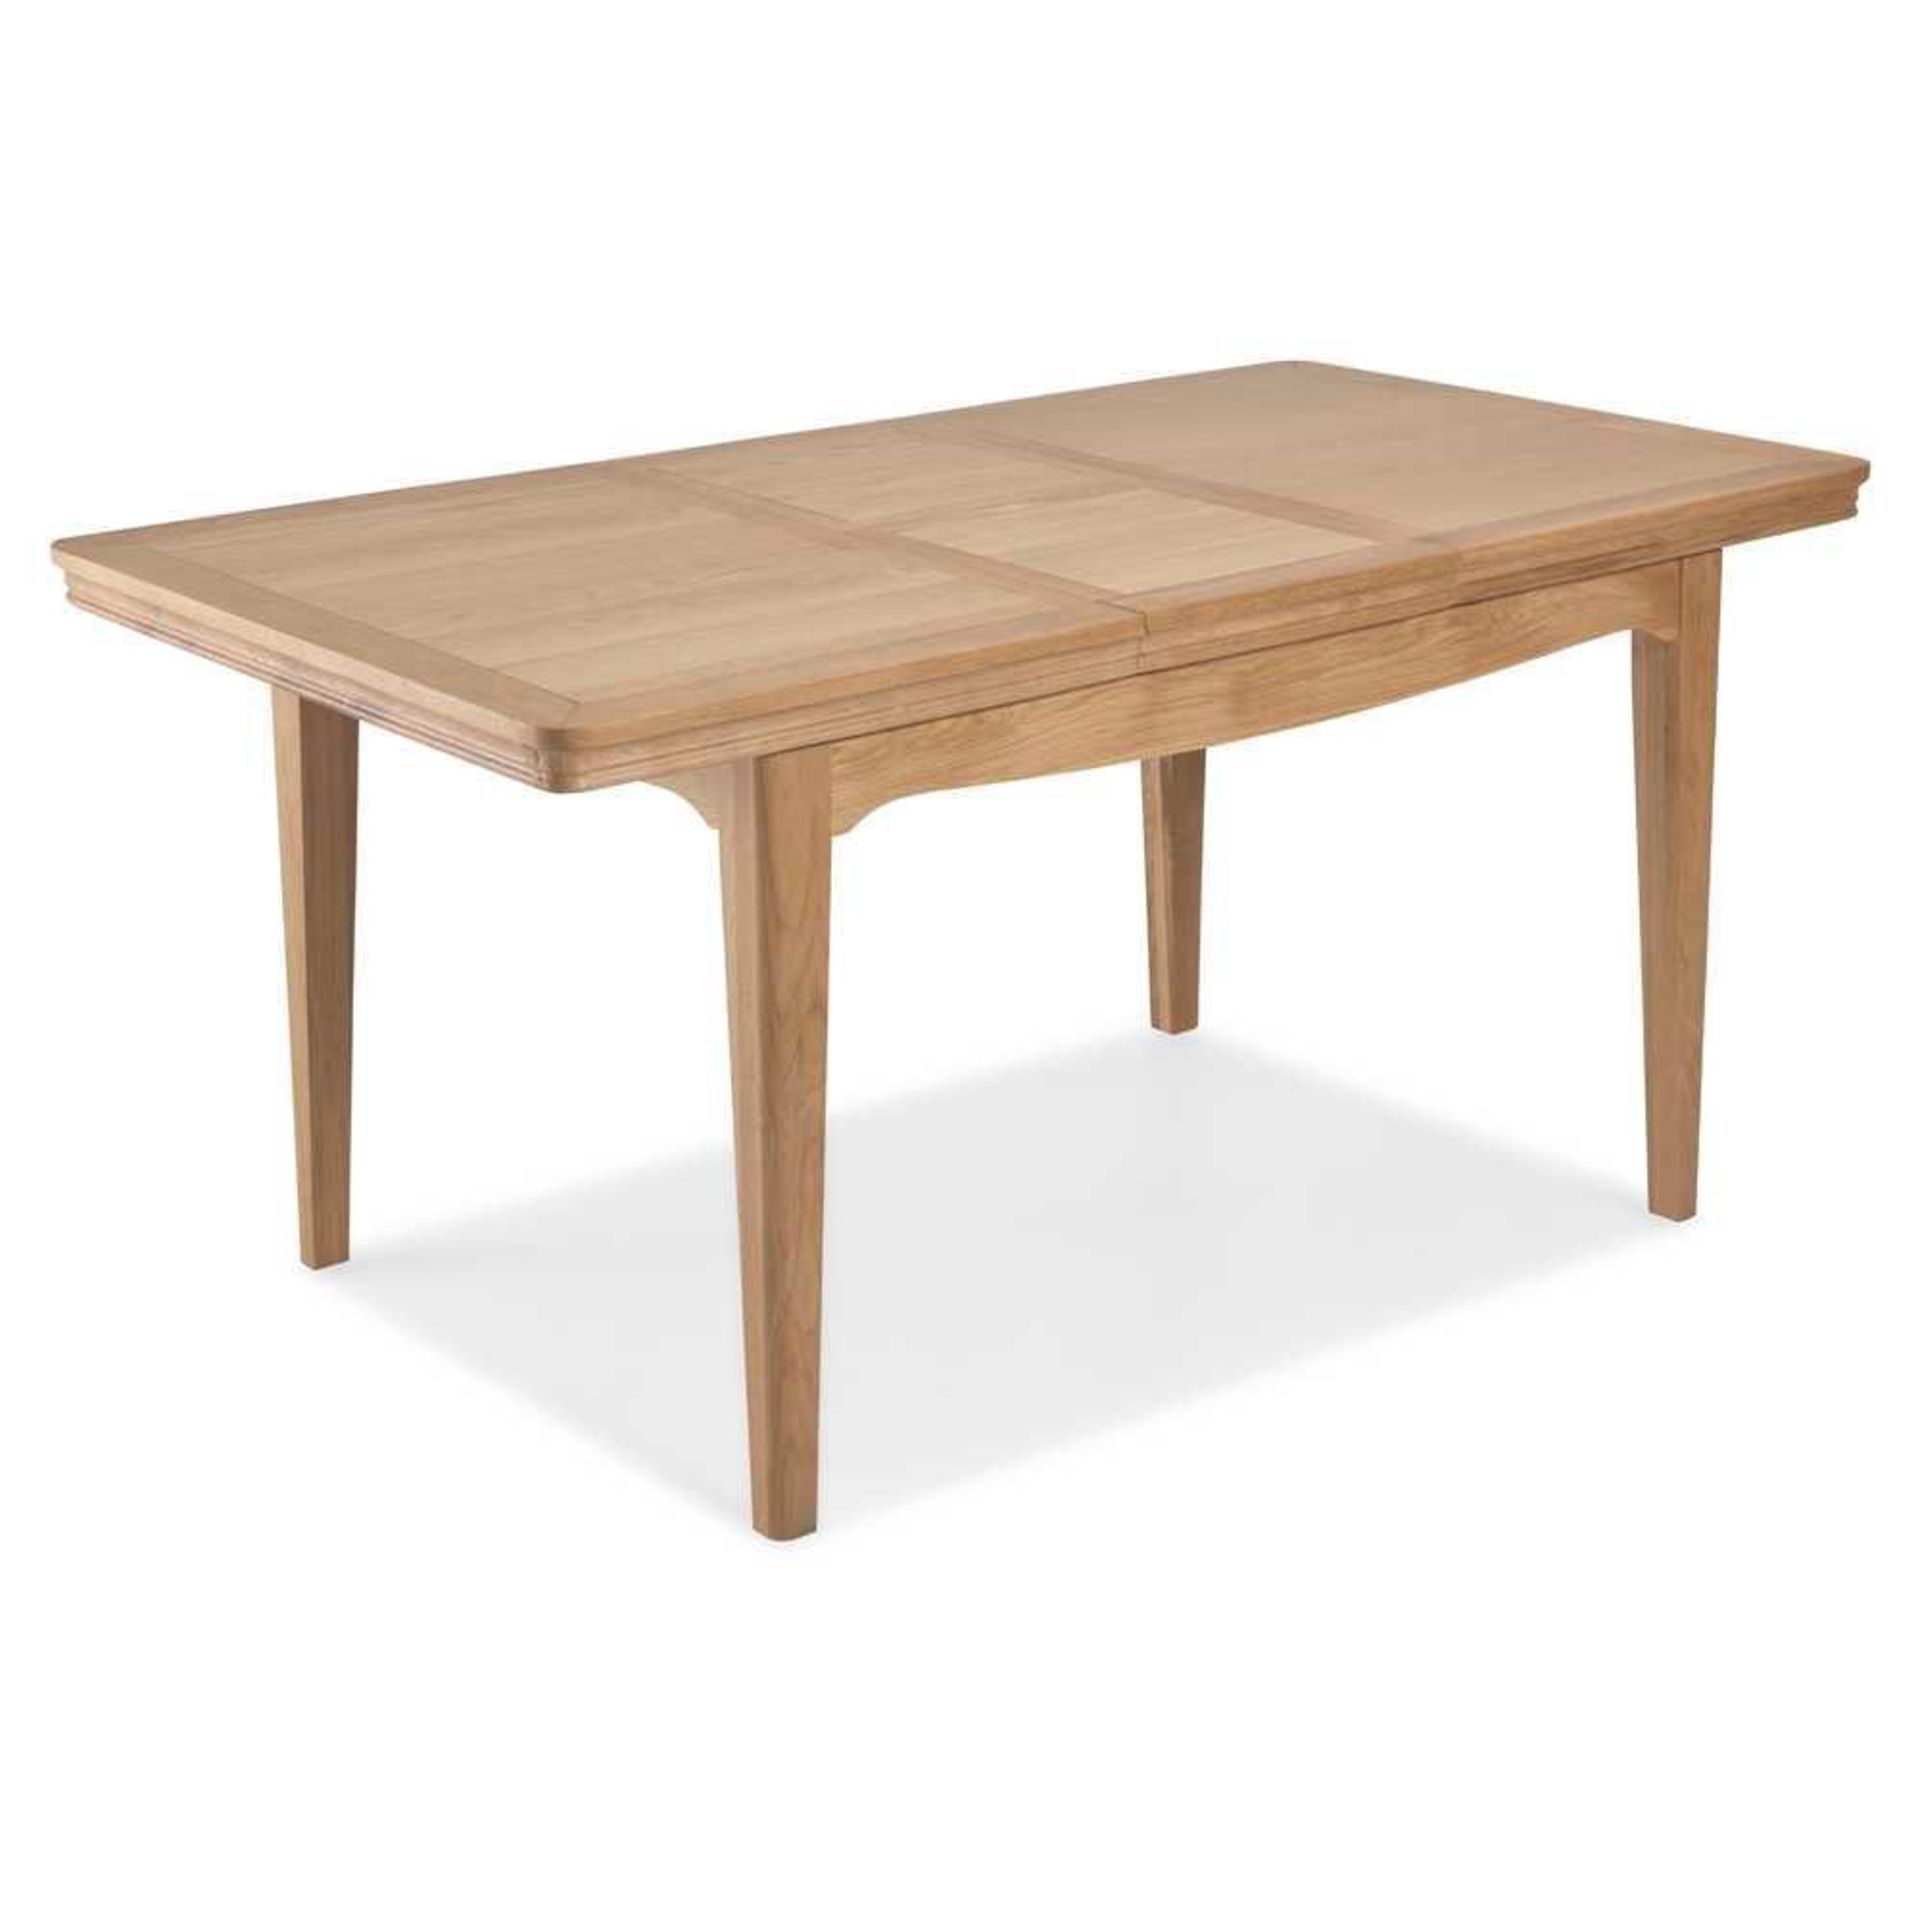 RRP £450. Boxed Claremont Extending Dining Table - Natural. (Appraisals Available On Request) (